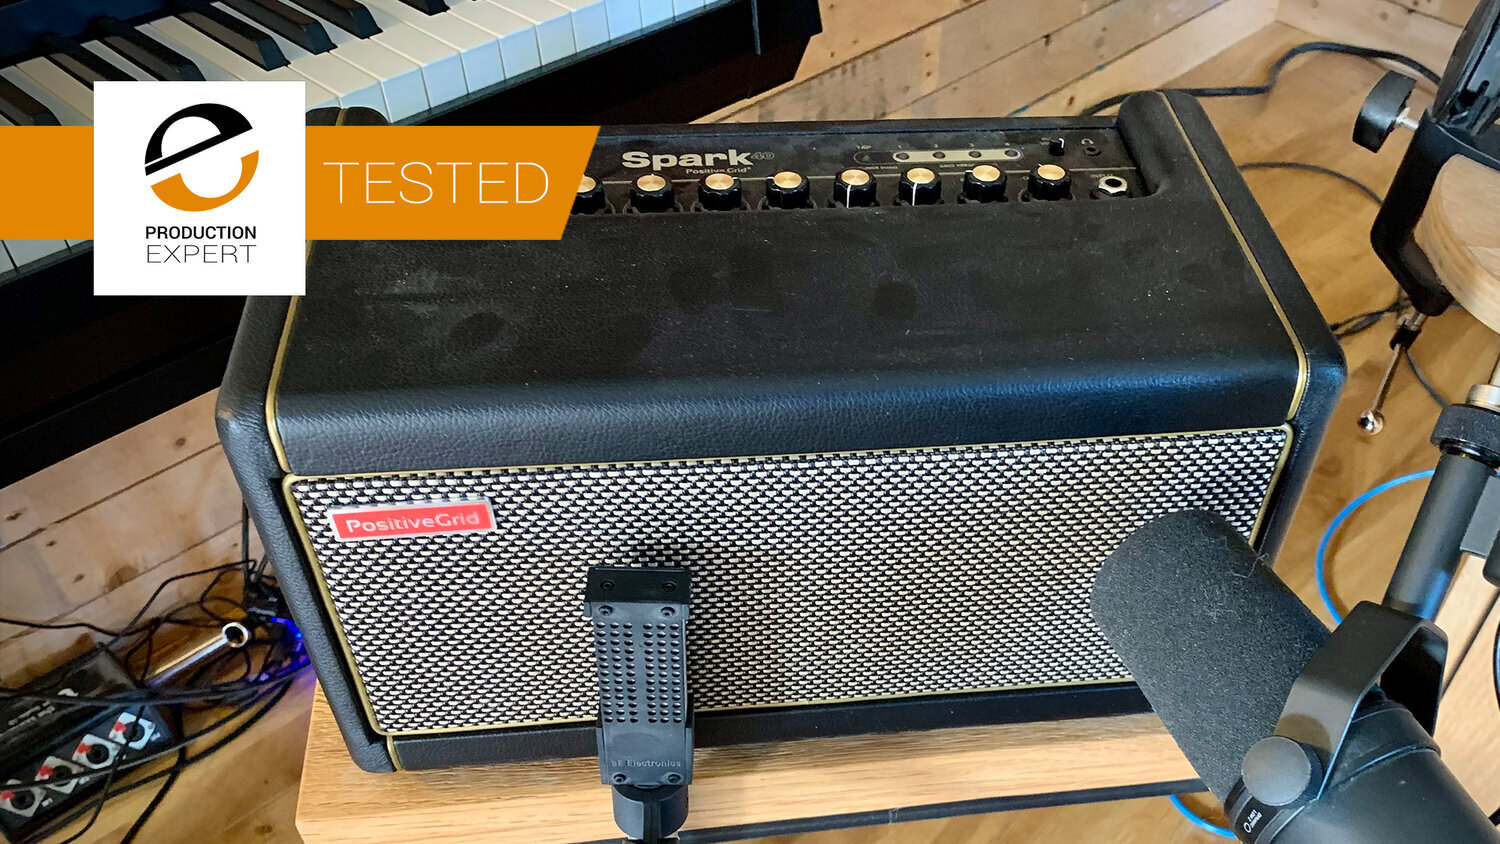 Positive Grid Smart Guitar Amp Tested - Is It Any Good For The